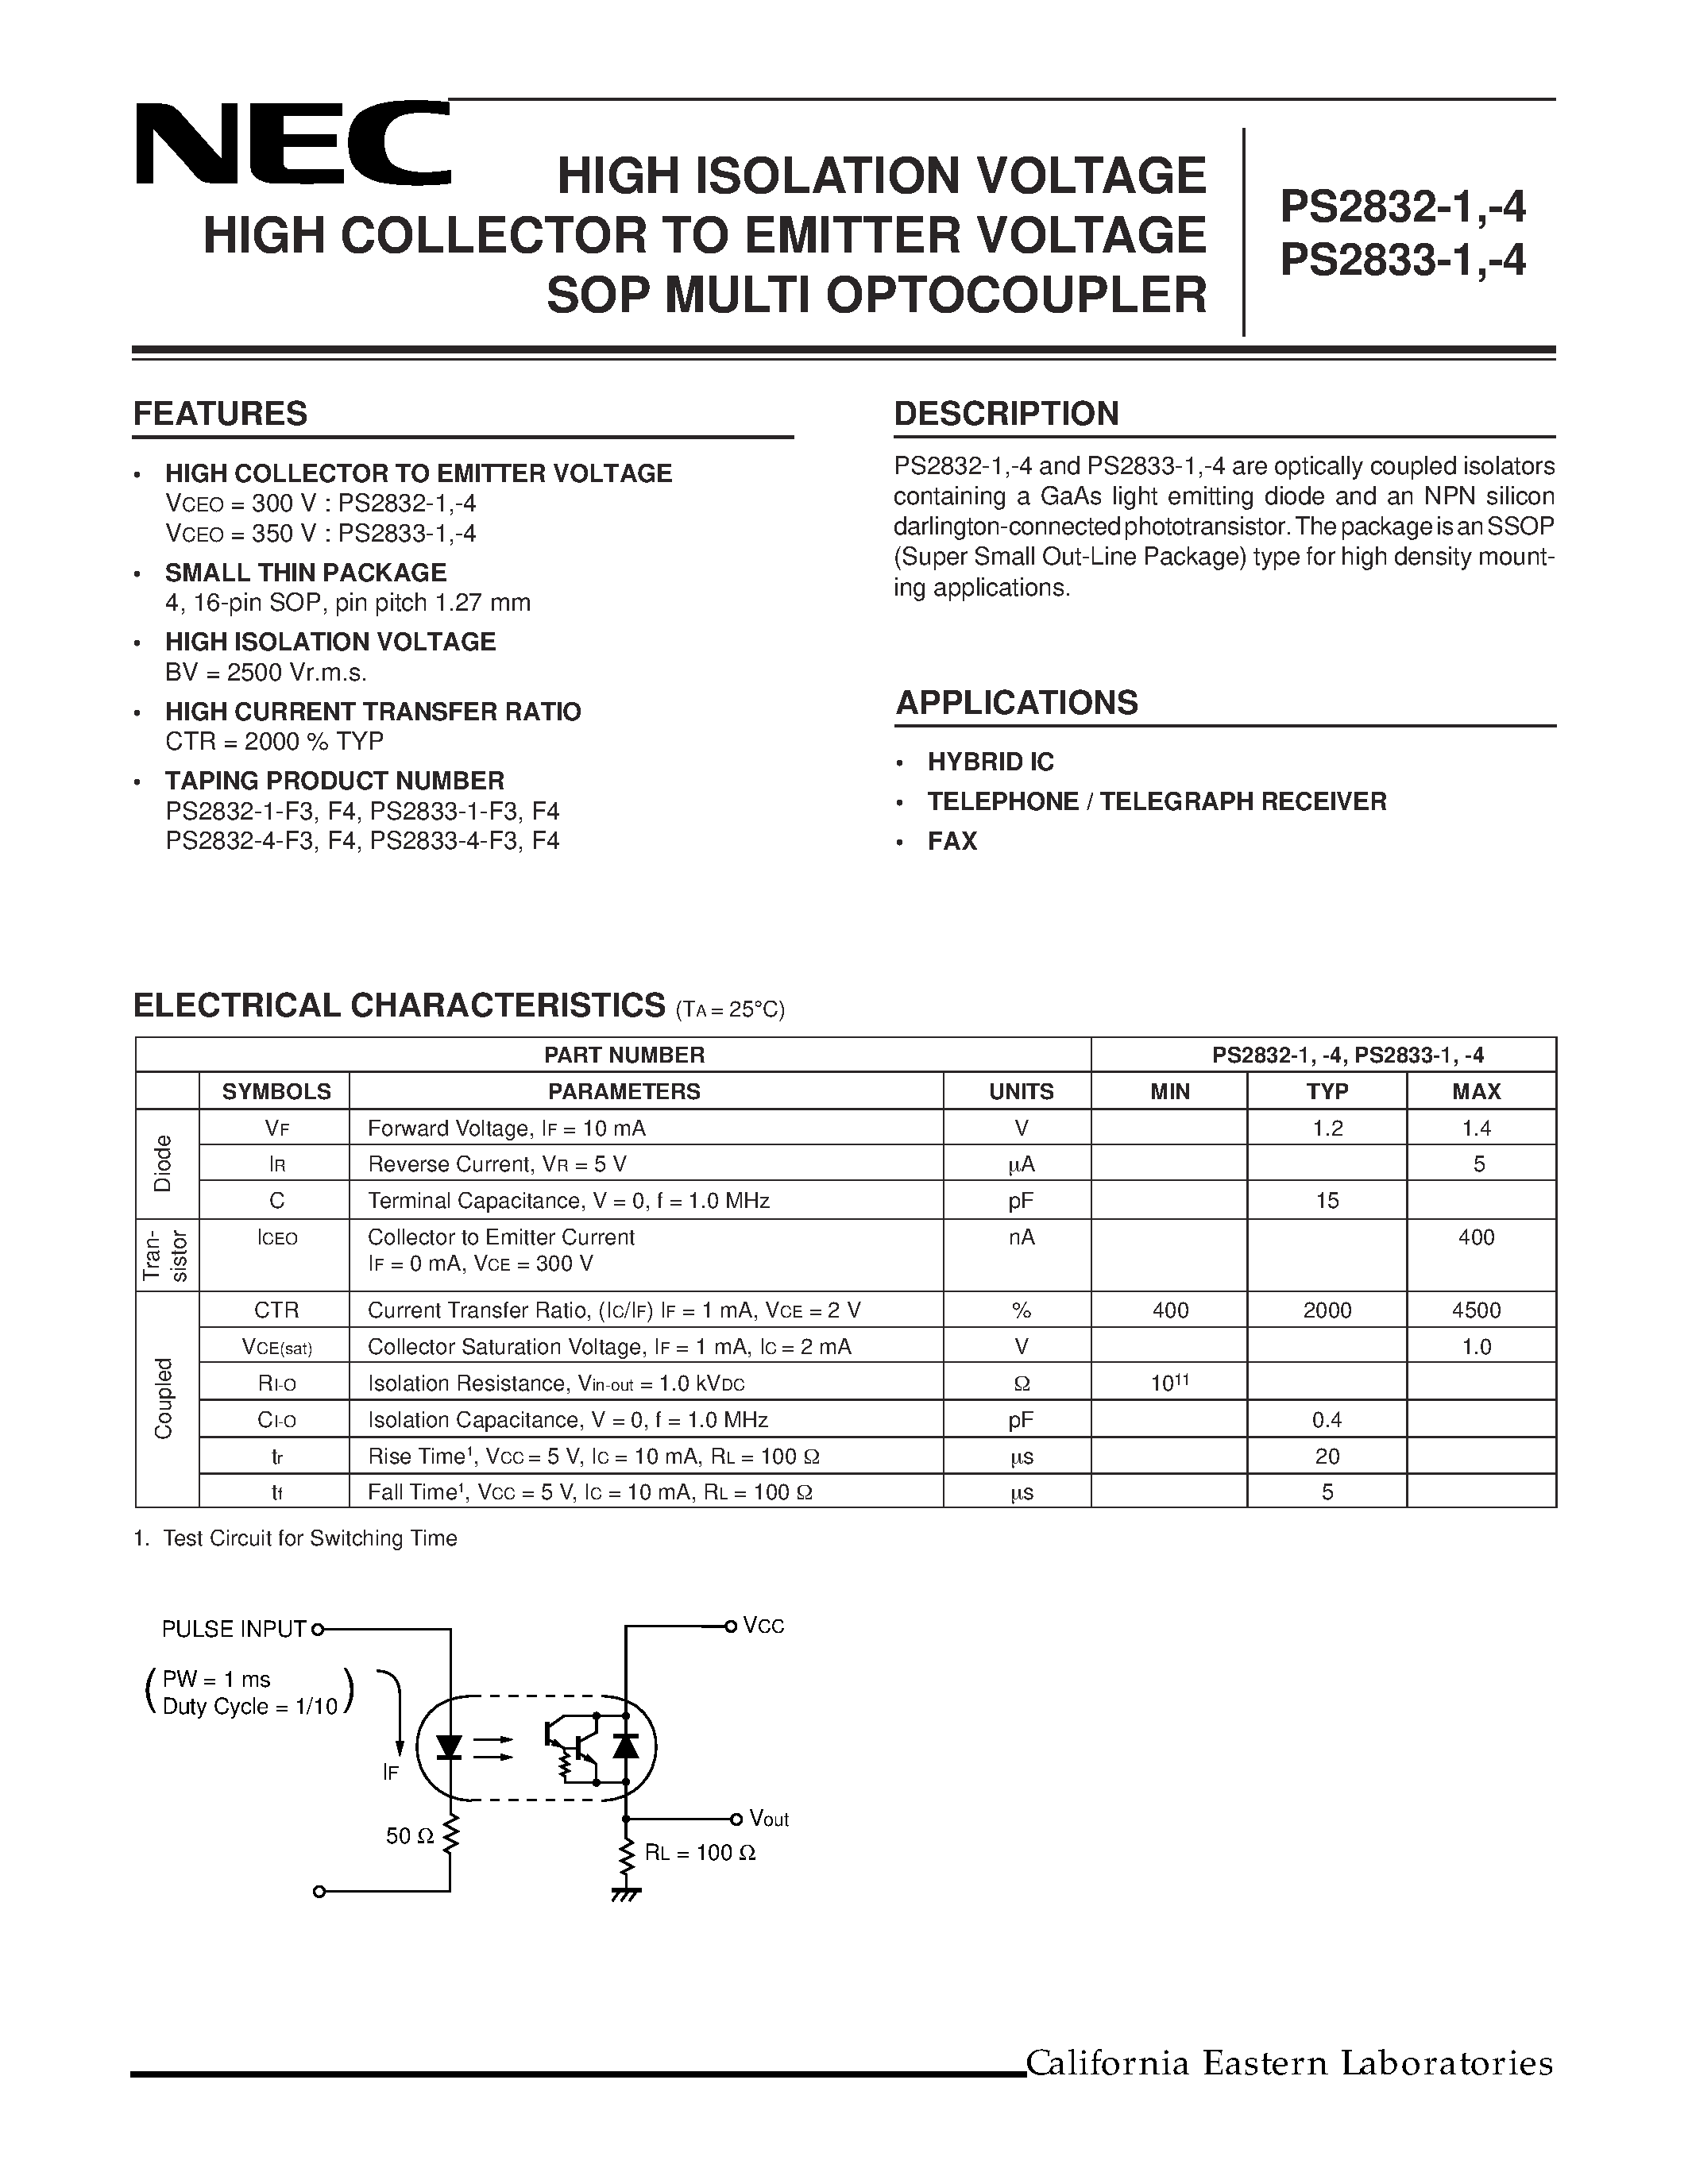 Даташит PS2833-1-V-F4 - HIGH ISOLATION VOLTAGE HIGH COLLECTOR TO EMITTER VOLTAGE SOP MULTI OPTOCOUPLER страница 1